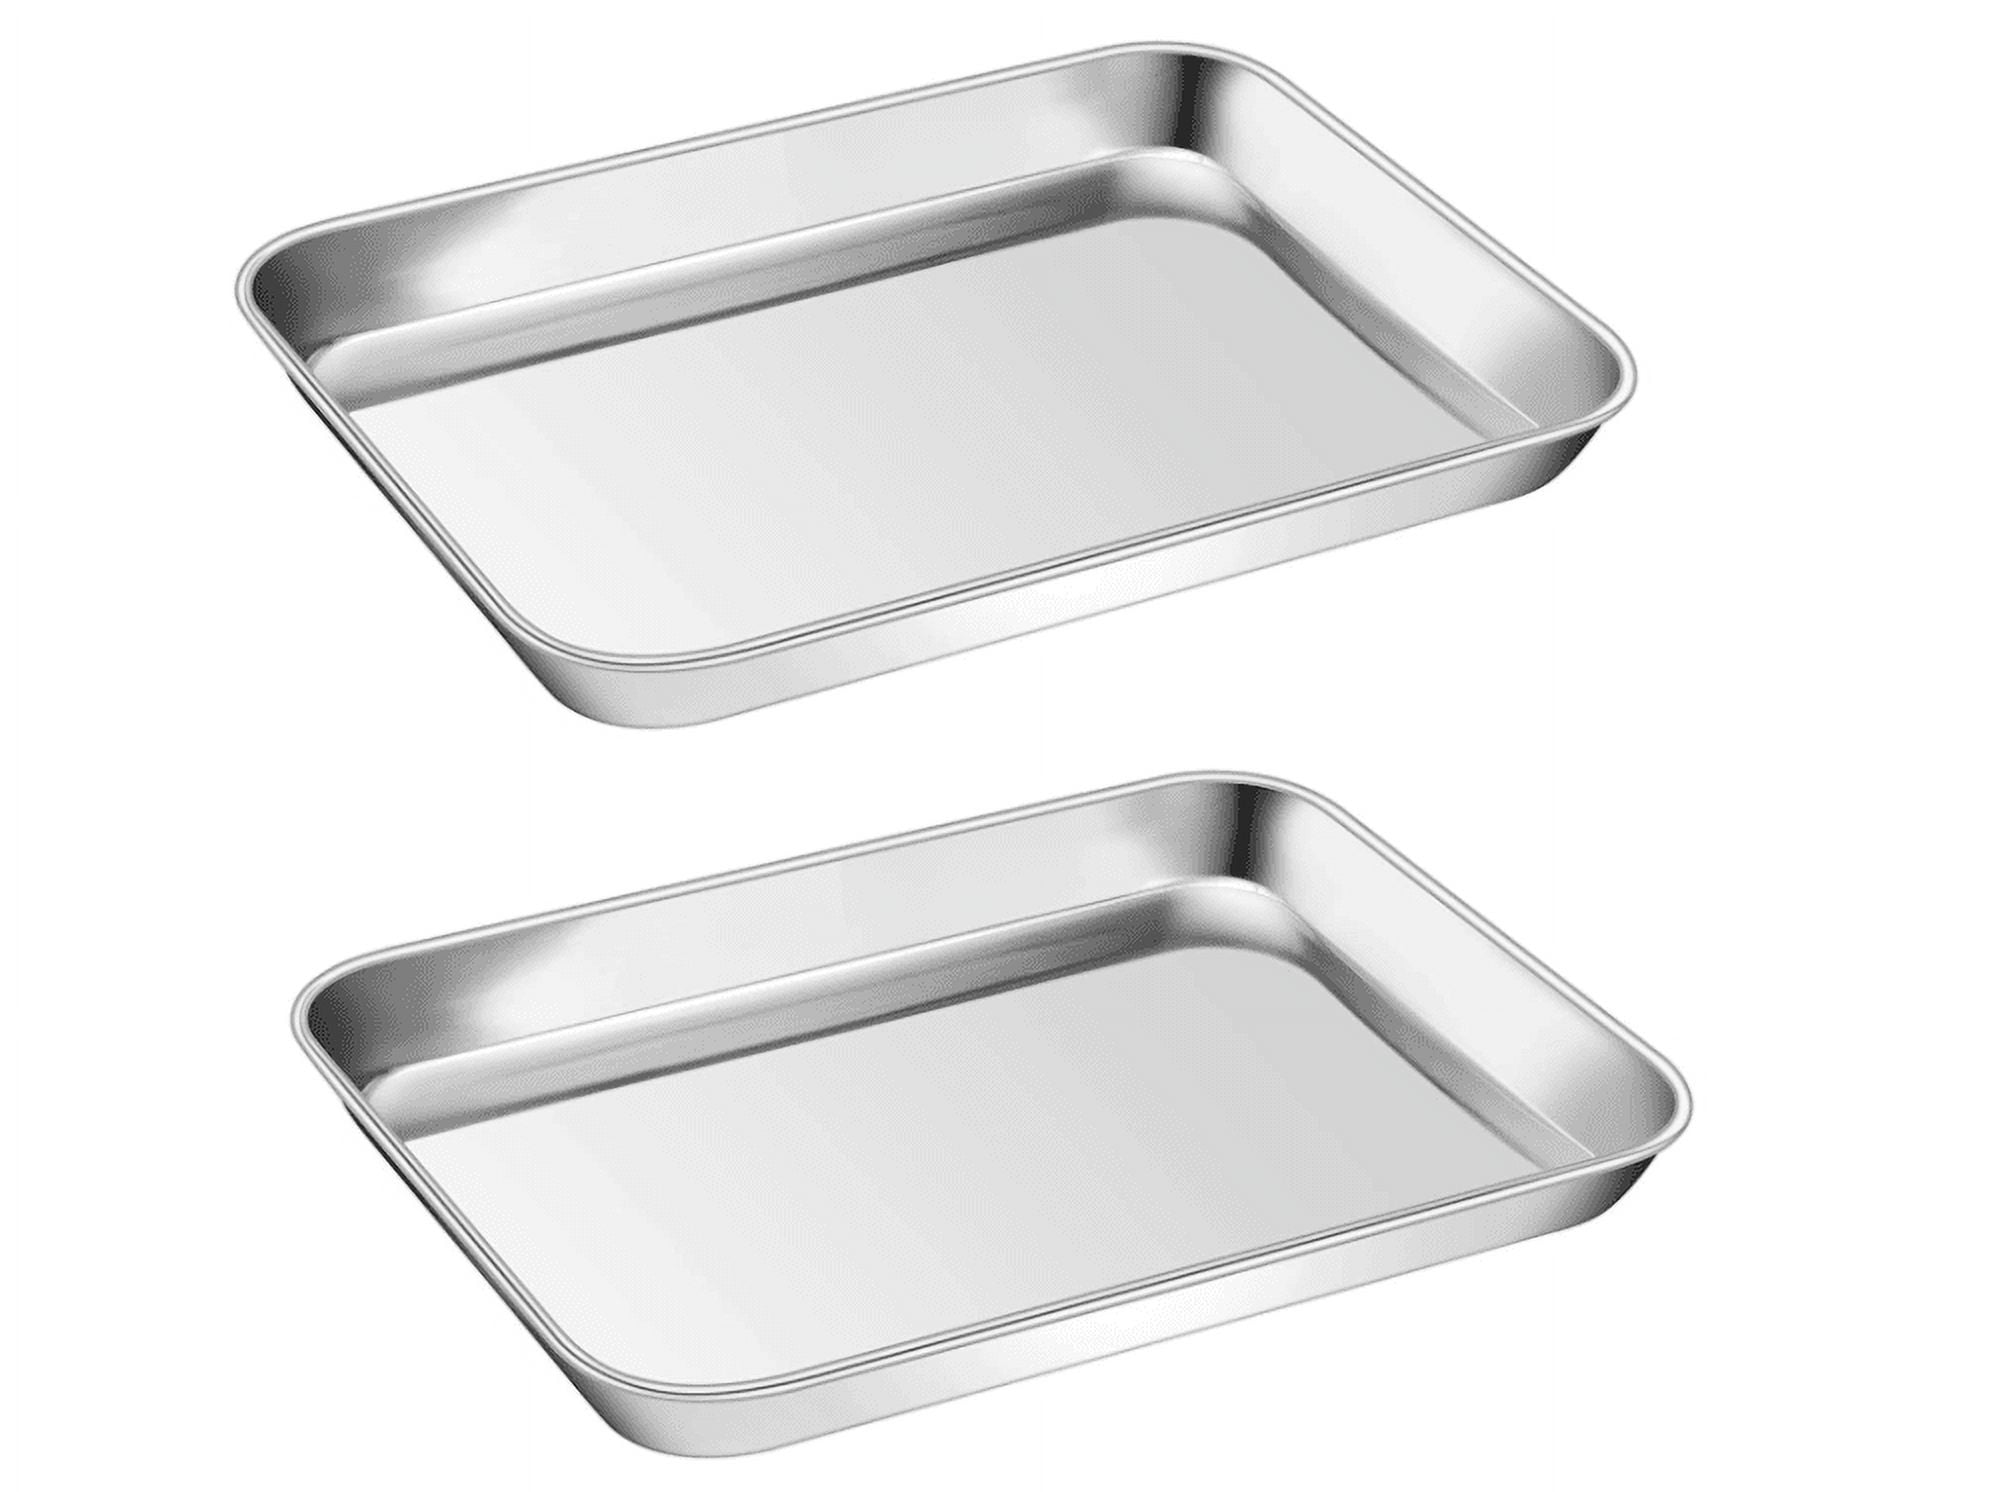 Small Baking Sheet Set of 2, E-far 9.4”x7.3” Stainless Steel Cookies Sheet  Pan for Toaster Oven with 50 Parchment Paper, Rectangle Baking Tray for